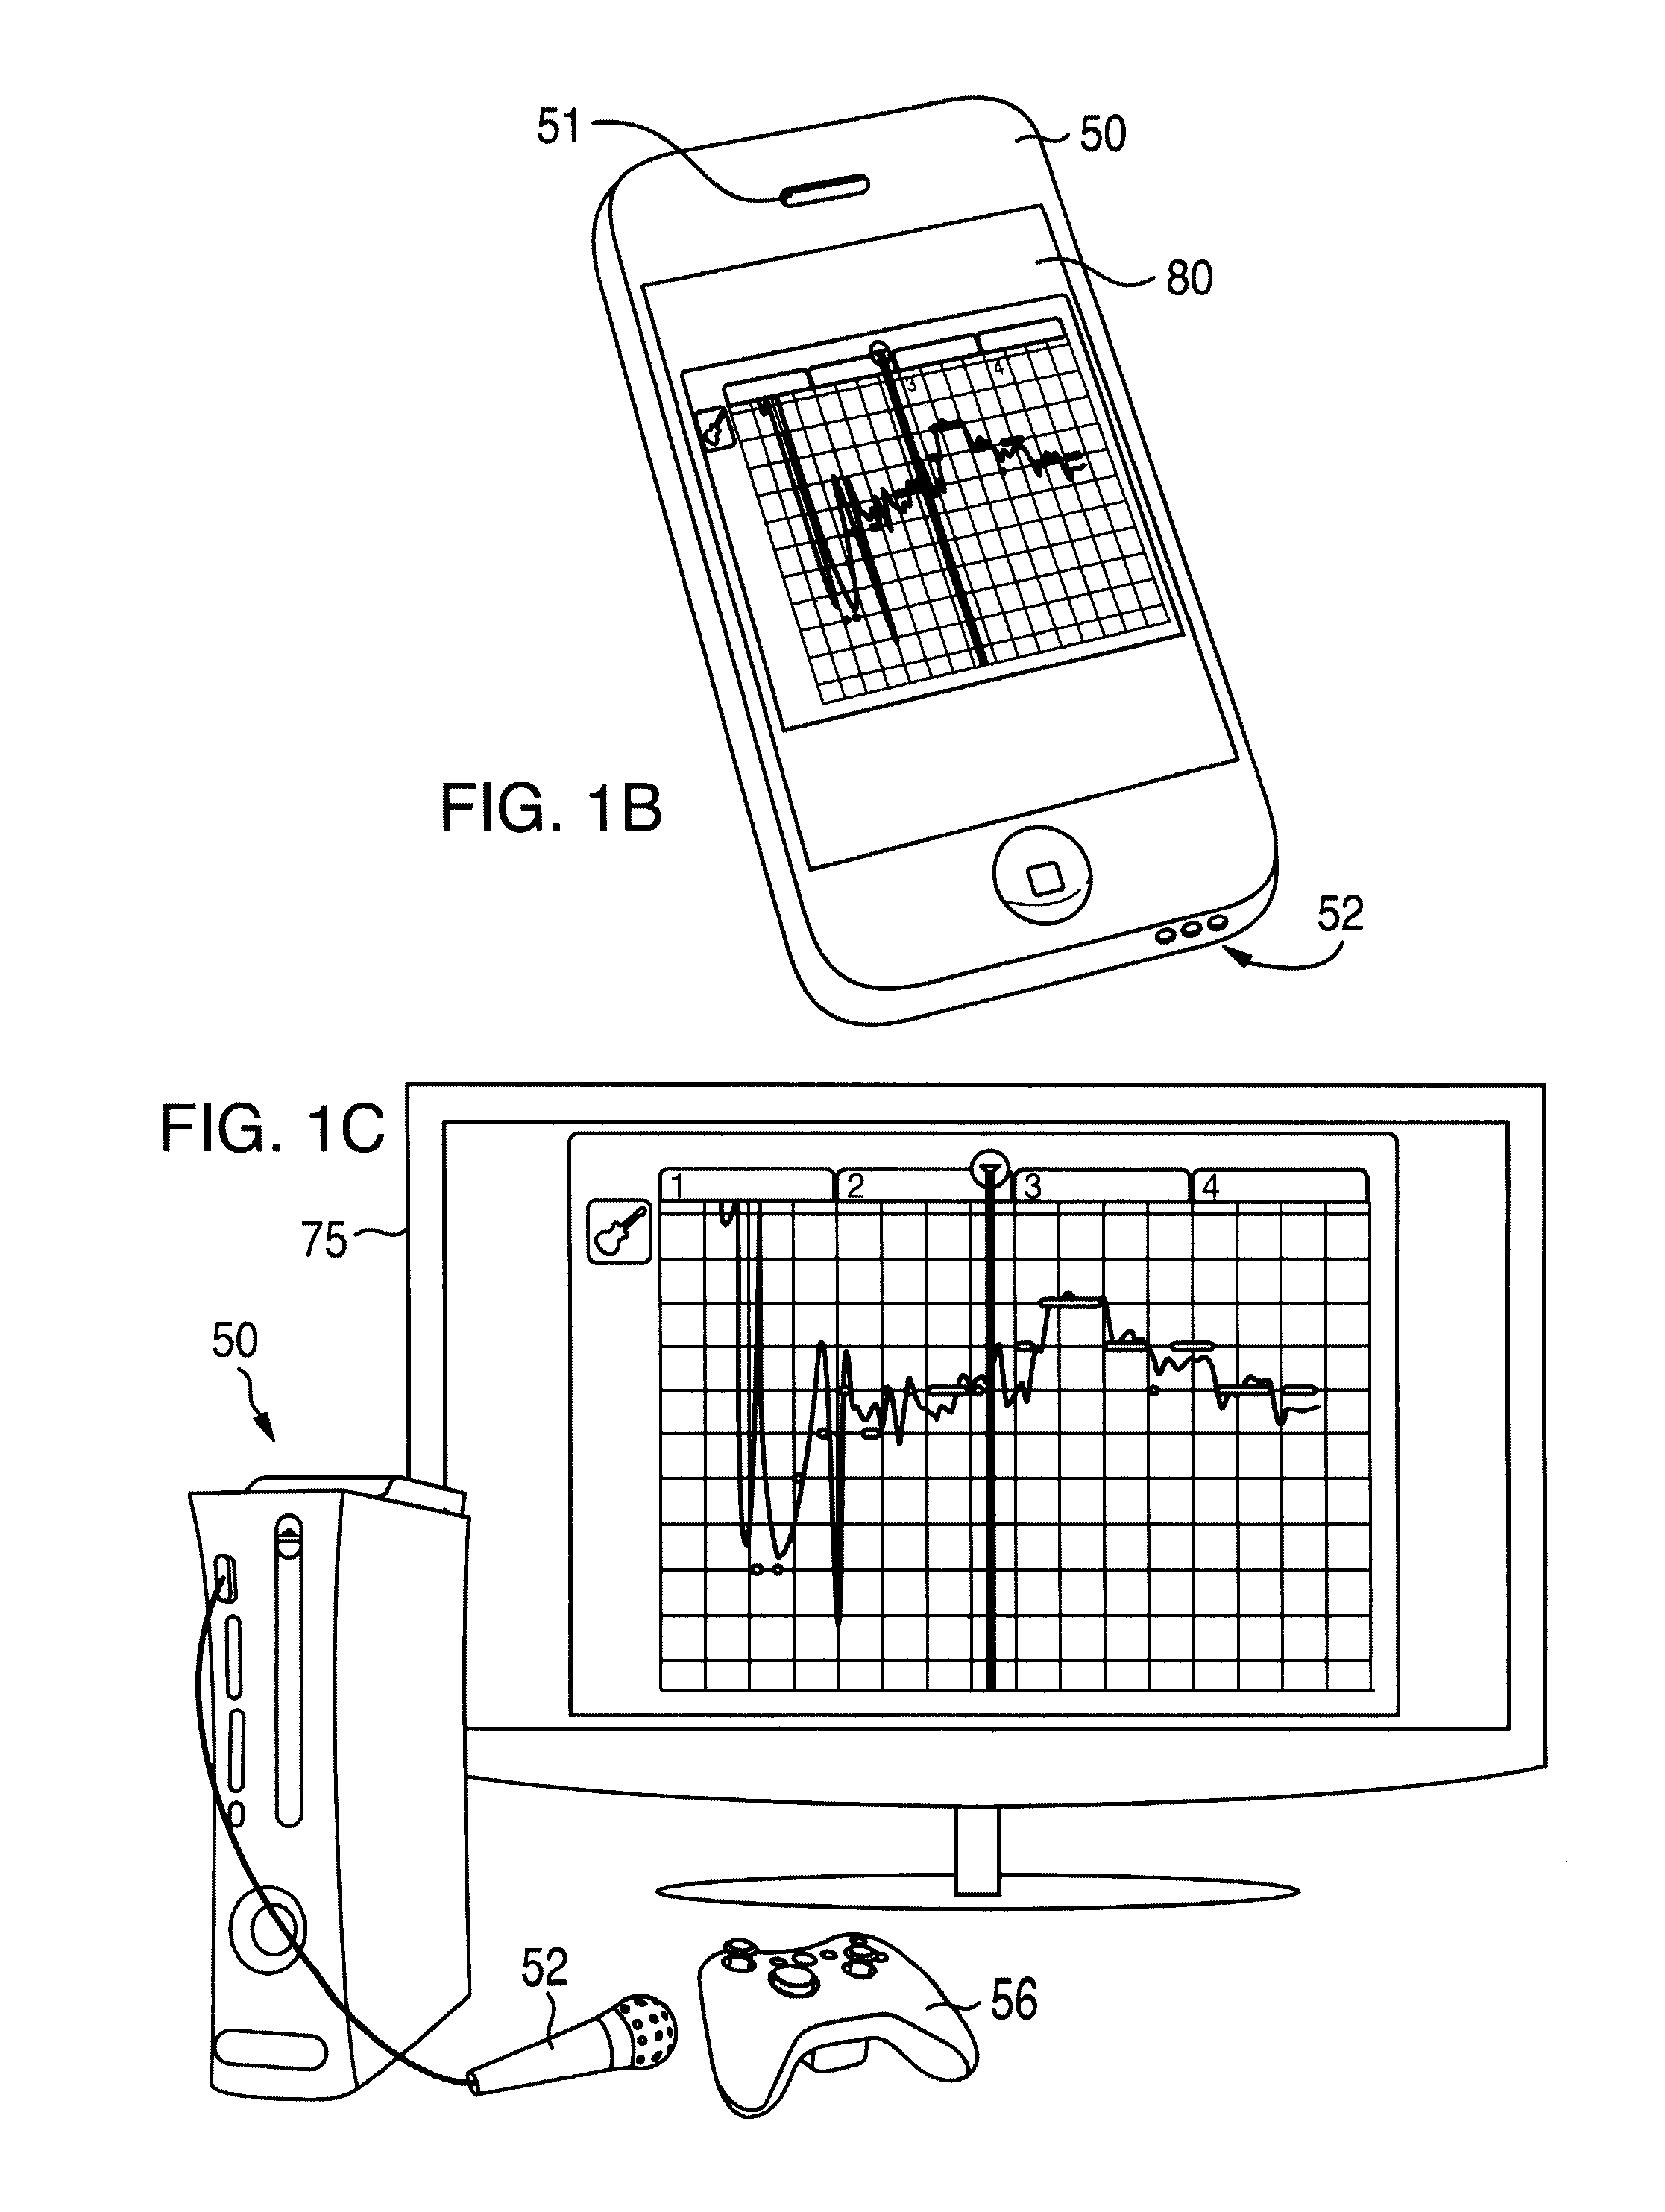 System and Method for Assisting a User to Create Musical Compositions